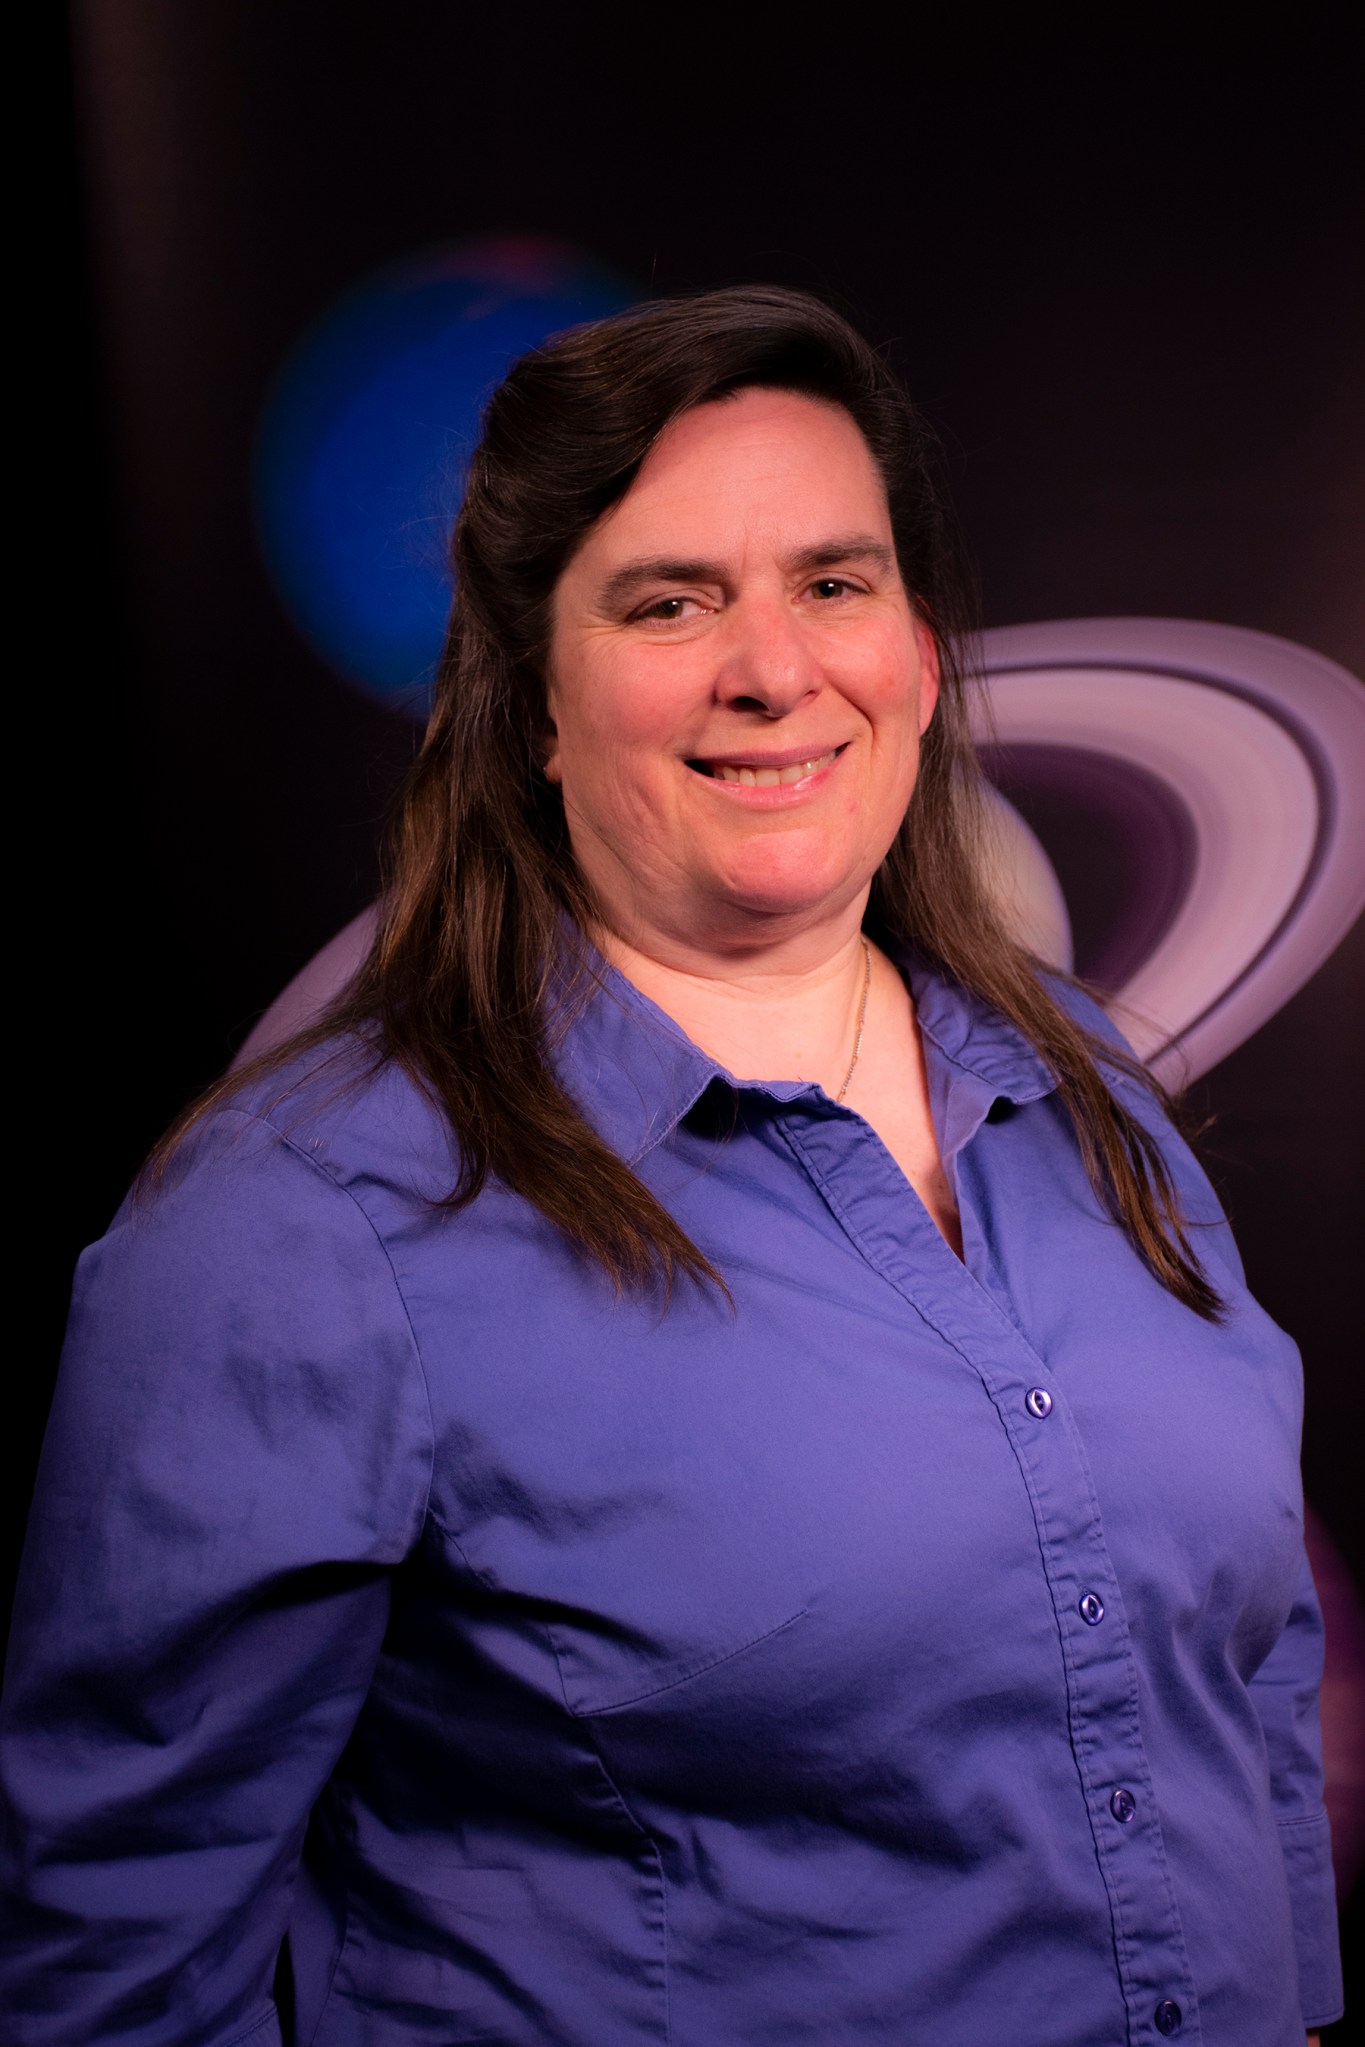 Lynn Bassford, a woman with long brown hair, smiles at the camera in an official headshot. She wears a purple collared shirt and poses in front of a photo of Saturn and Neptune.